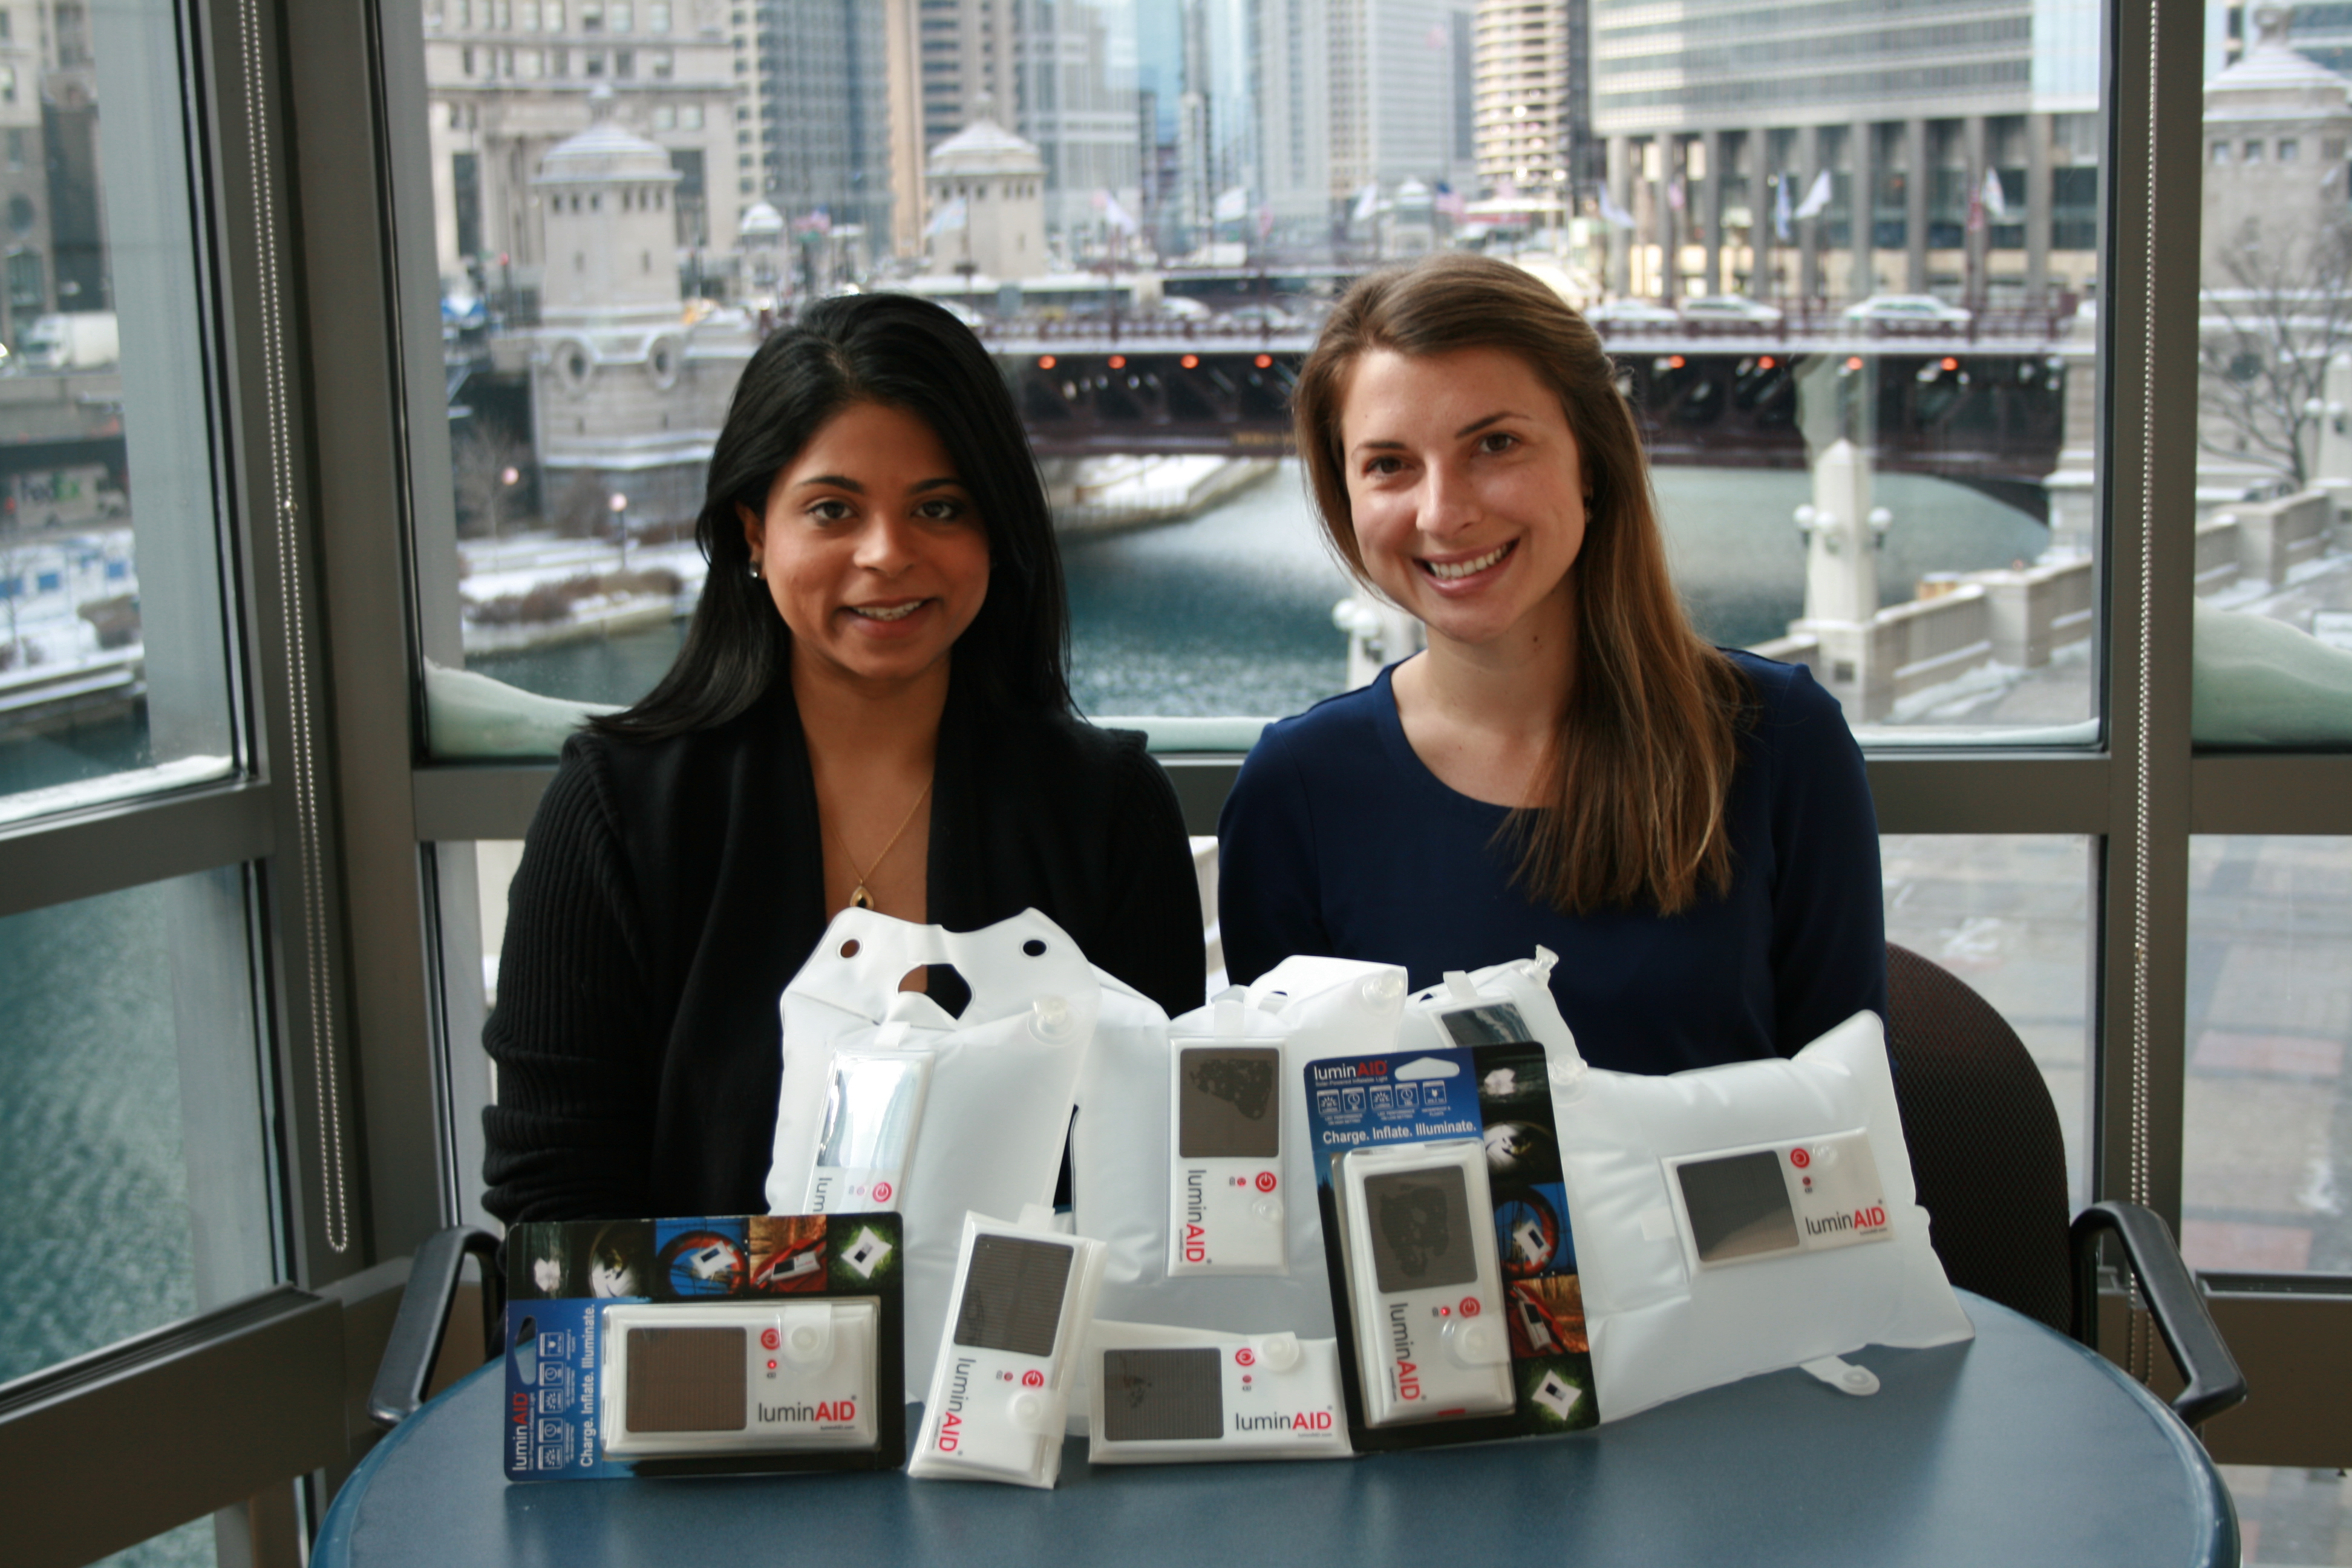 LuminAID Co-Founders Andrea Sreshta and Anna Stork invented their first solar lantern as architecture students after the 2010 Haiti Earthquake.